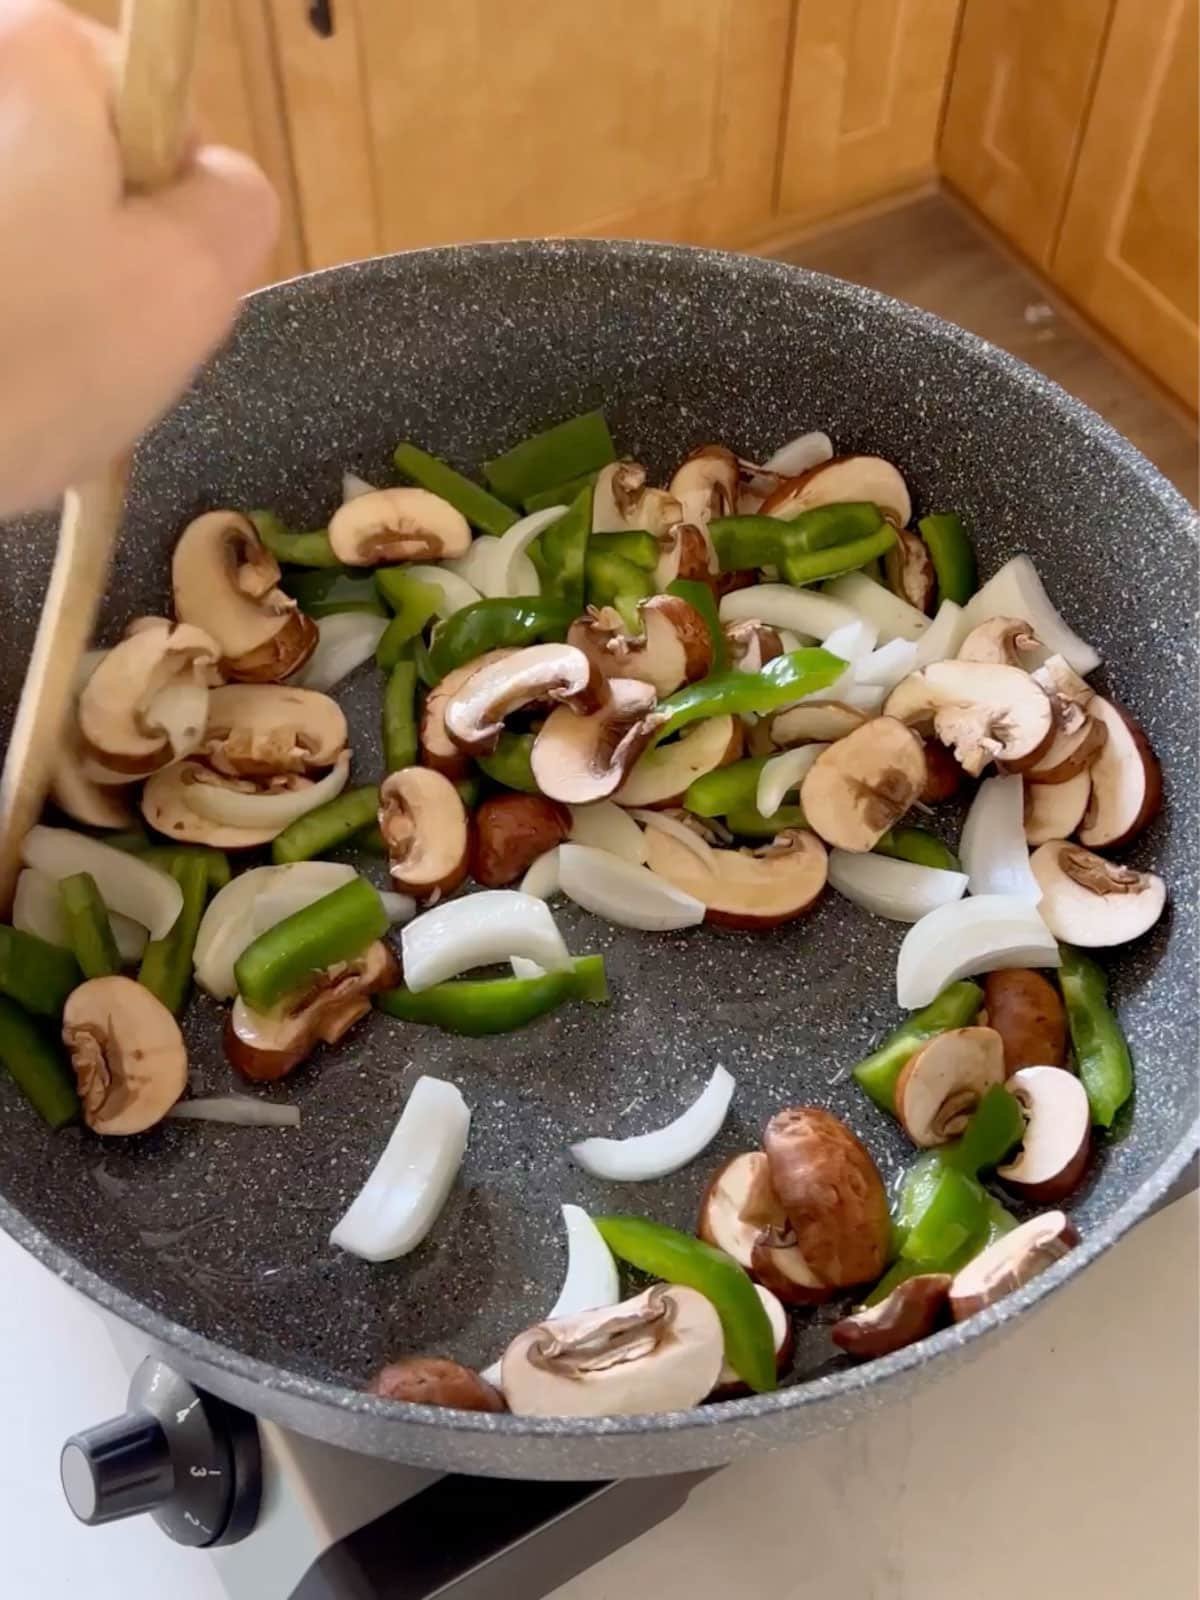 Onions, peppers and mushrooms in a skillet being sautéed.